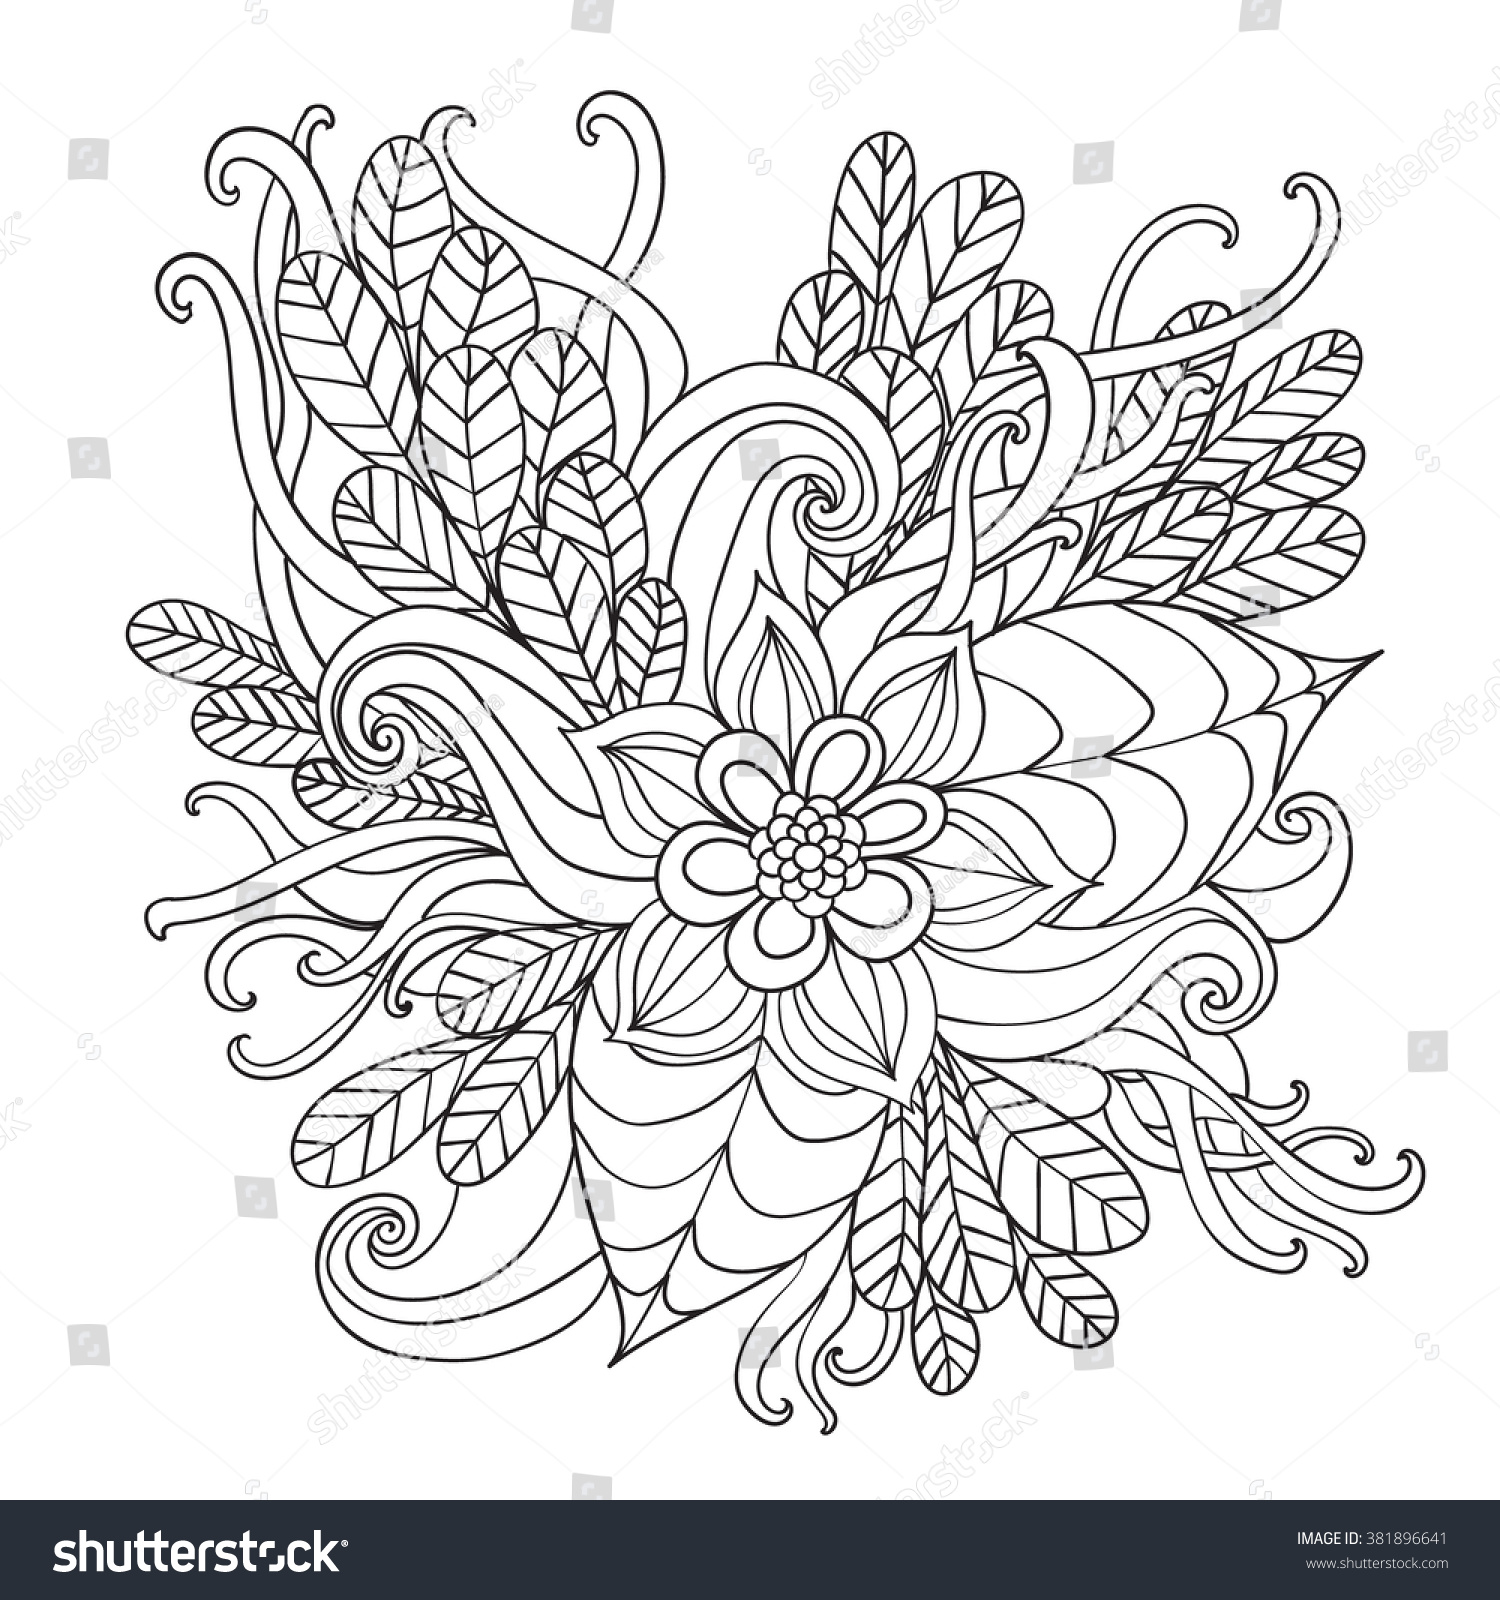 Hand Drawn Artistic Ethnic Ornamental Patterned Stock Vector (Royalty